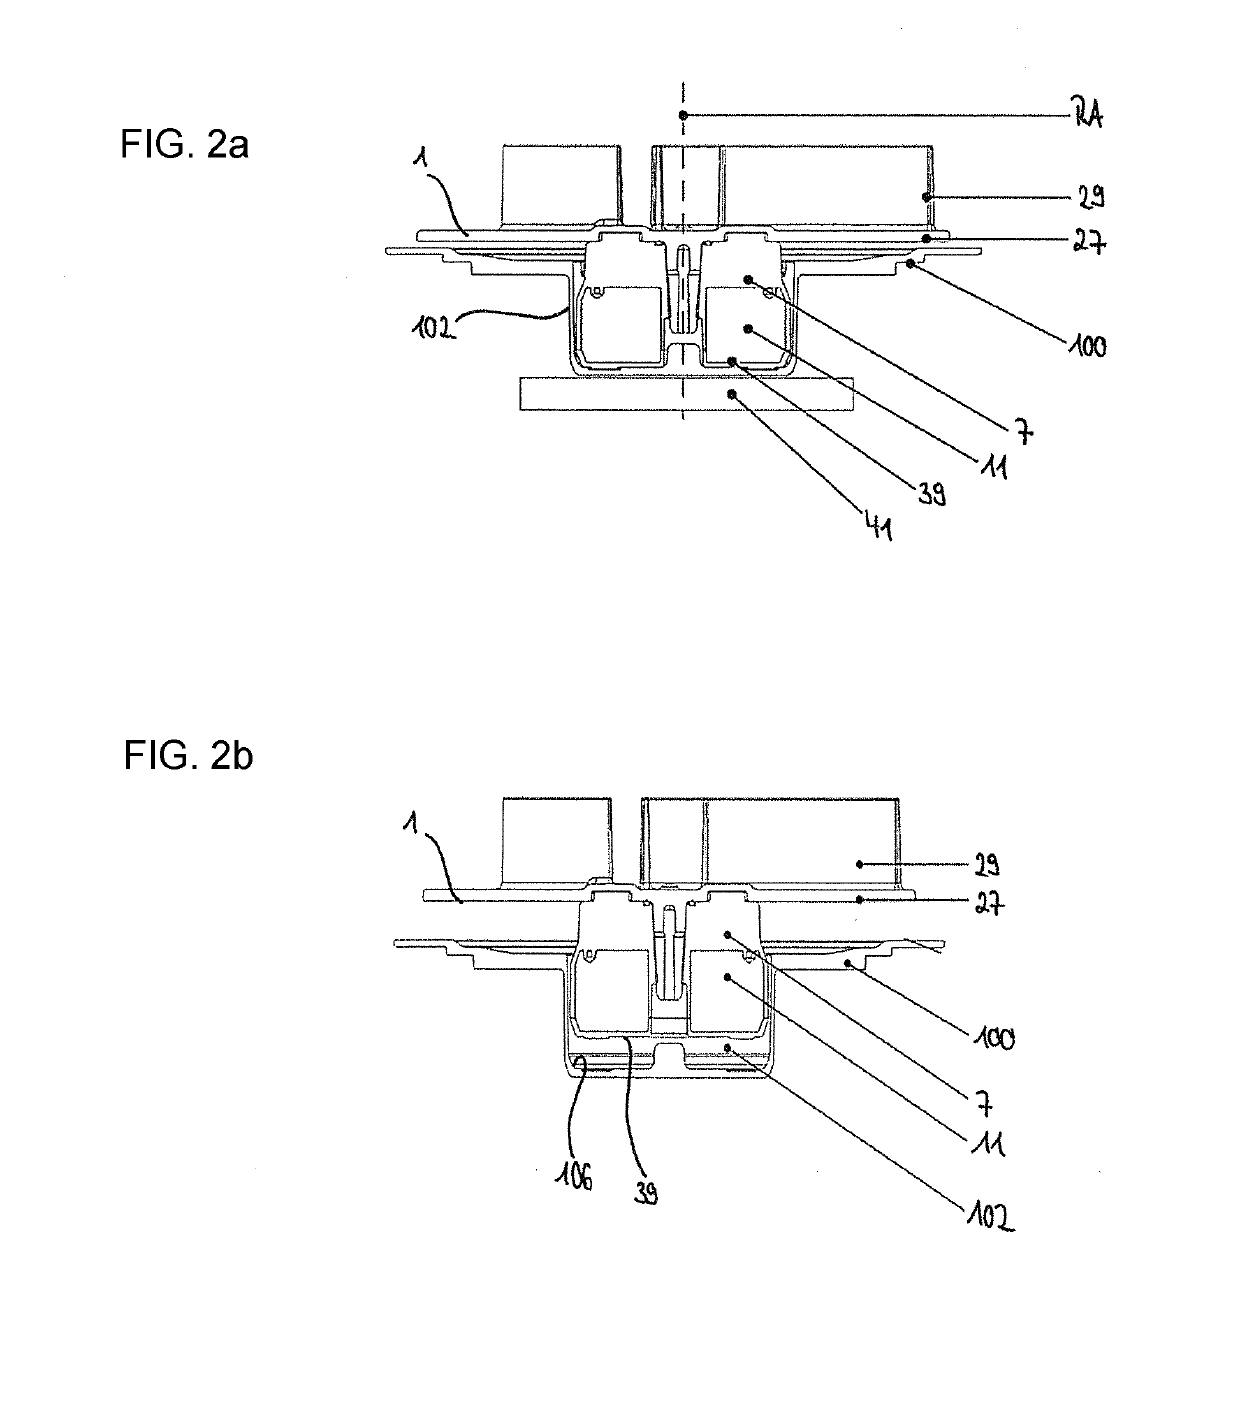 Mixing vessel with locking assembly for locking a mixing assembly in storage position and mixing impeller with central disc-like member